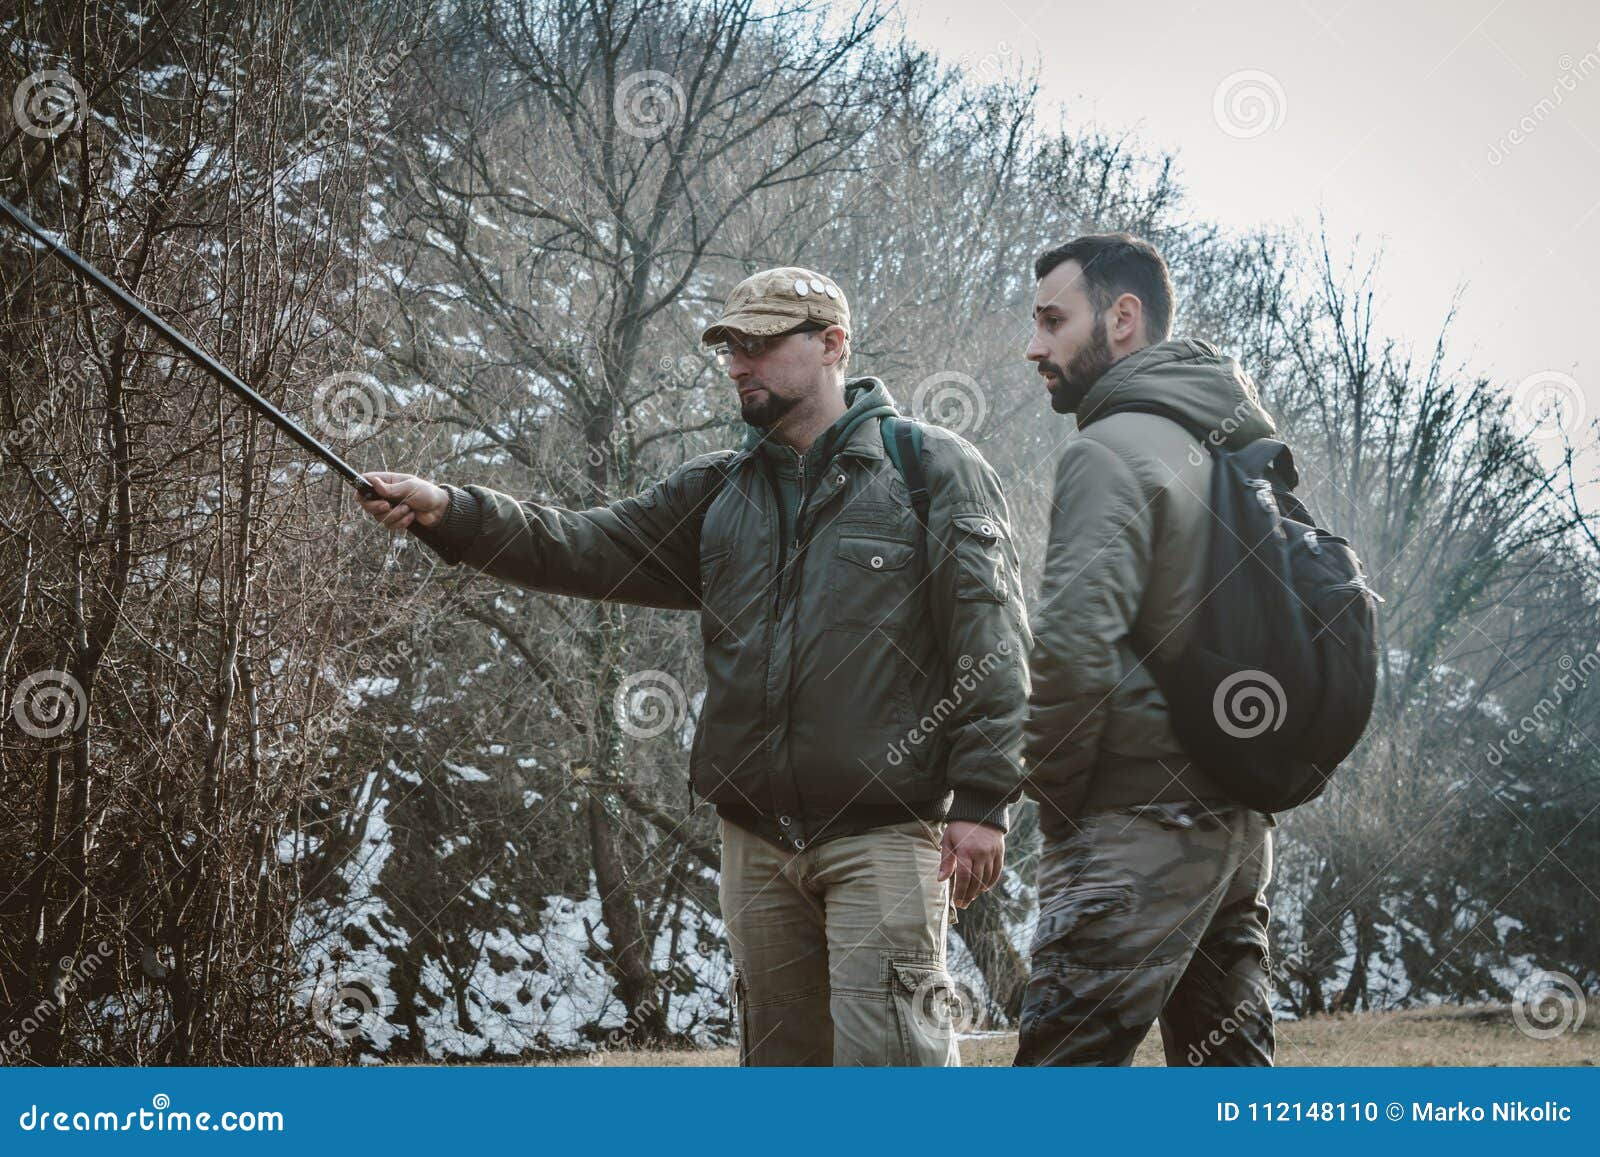 https://thumbs.dreamstime.com/z/two-men-talking-nature-carry-backpacks-fishing-rods-outdoor-activities-two-men-talking-nature-carry-backpacks-112148110.jpg